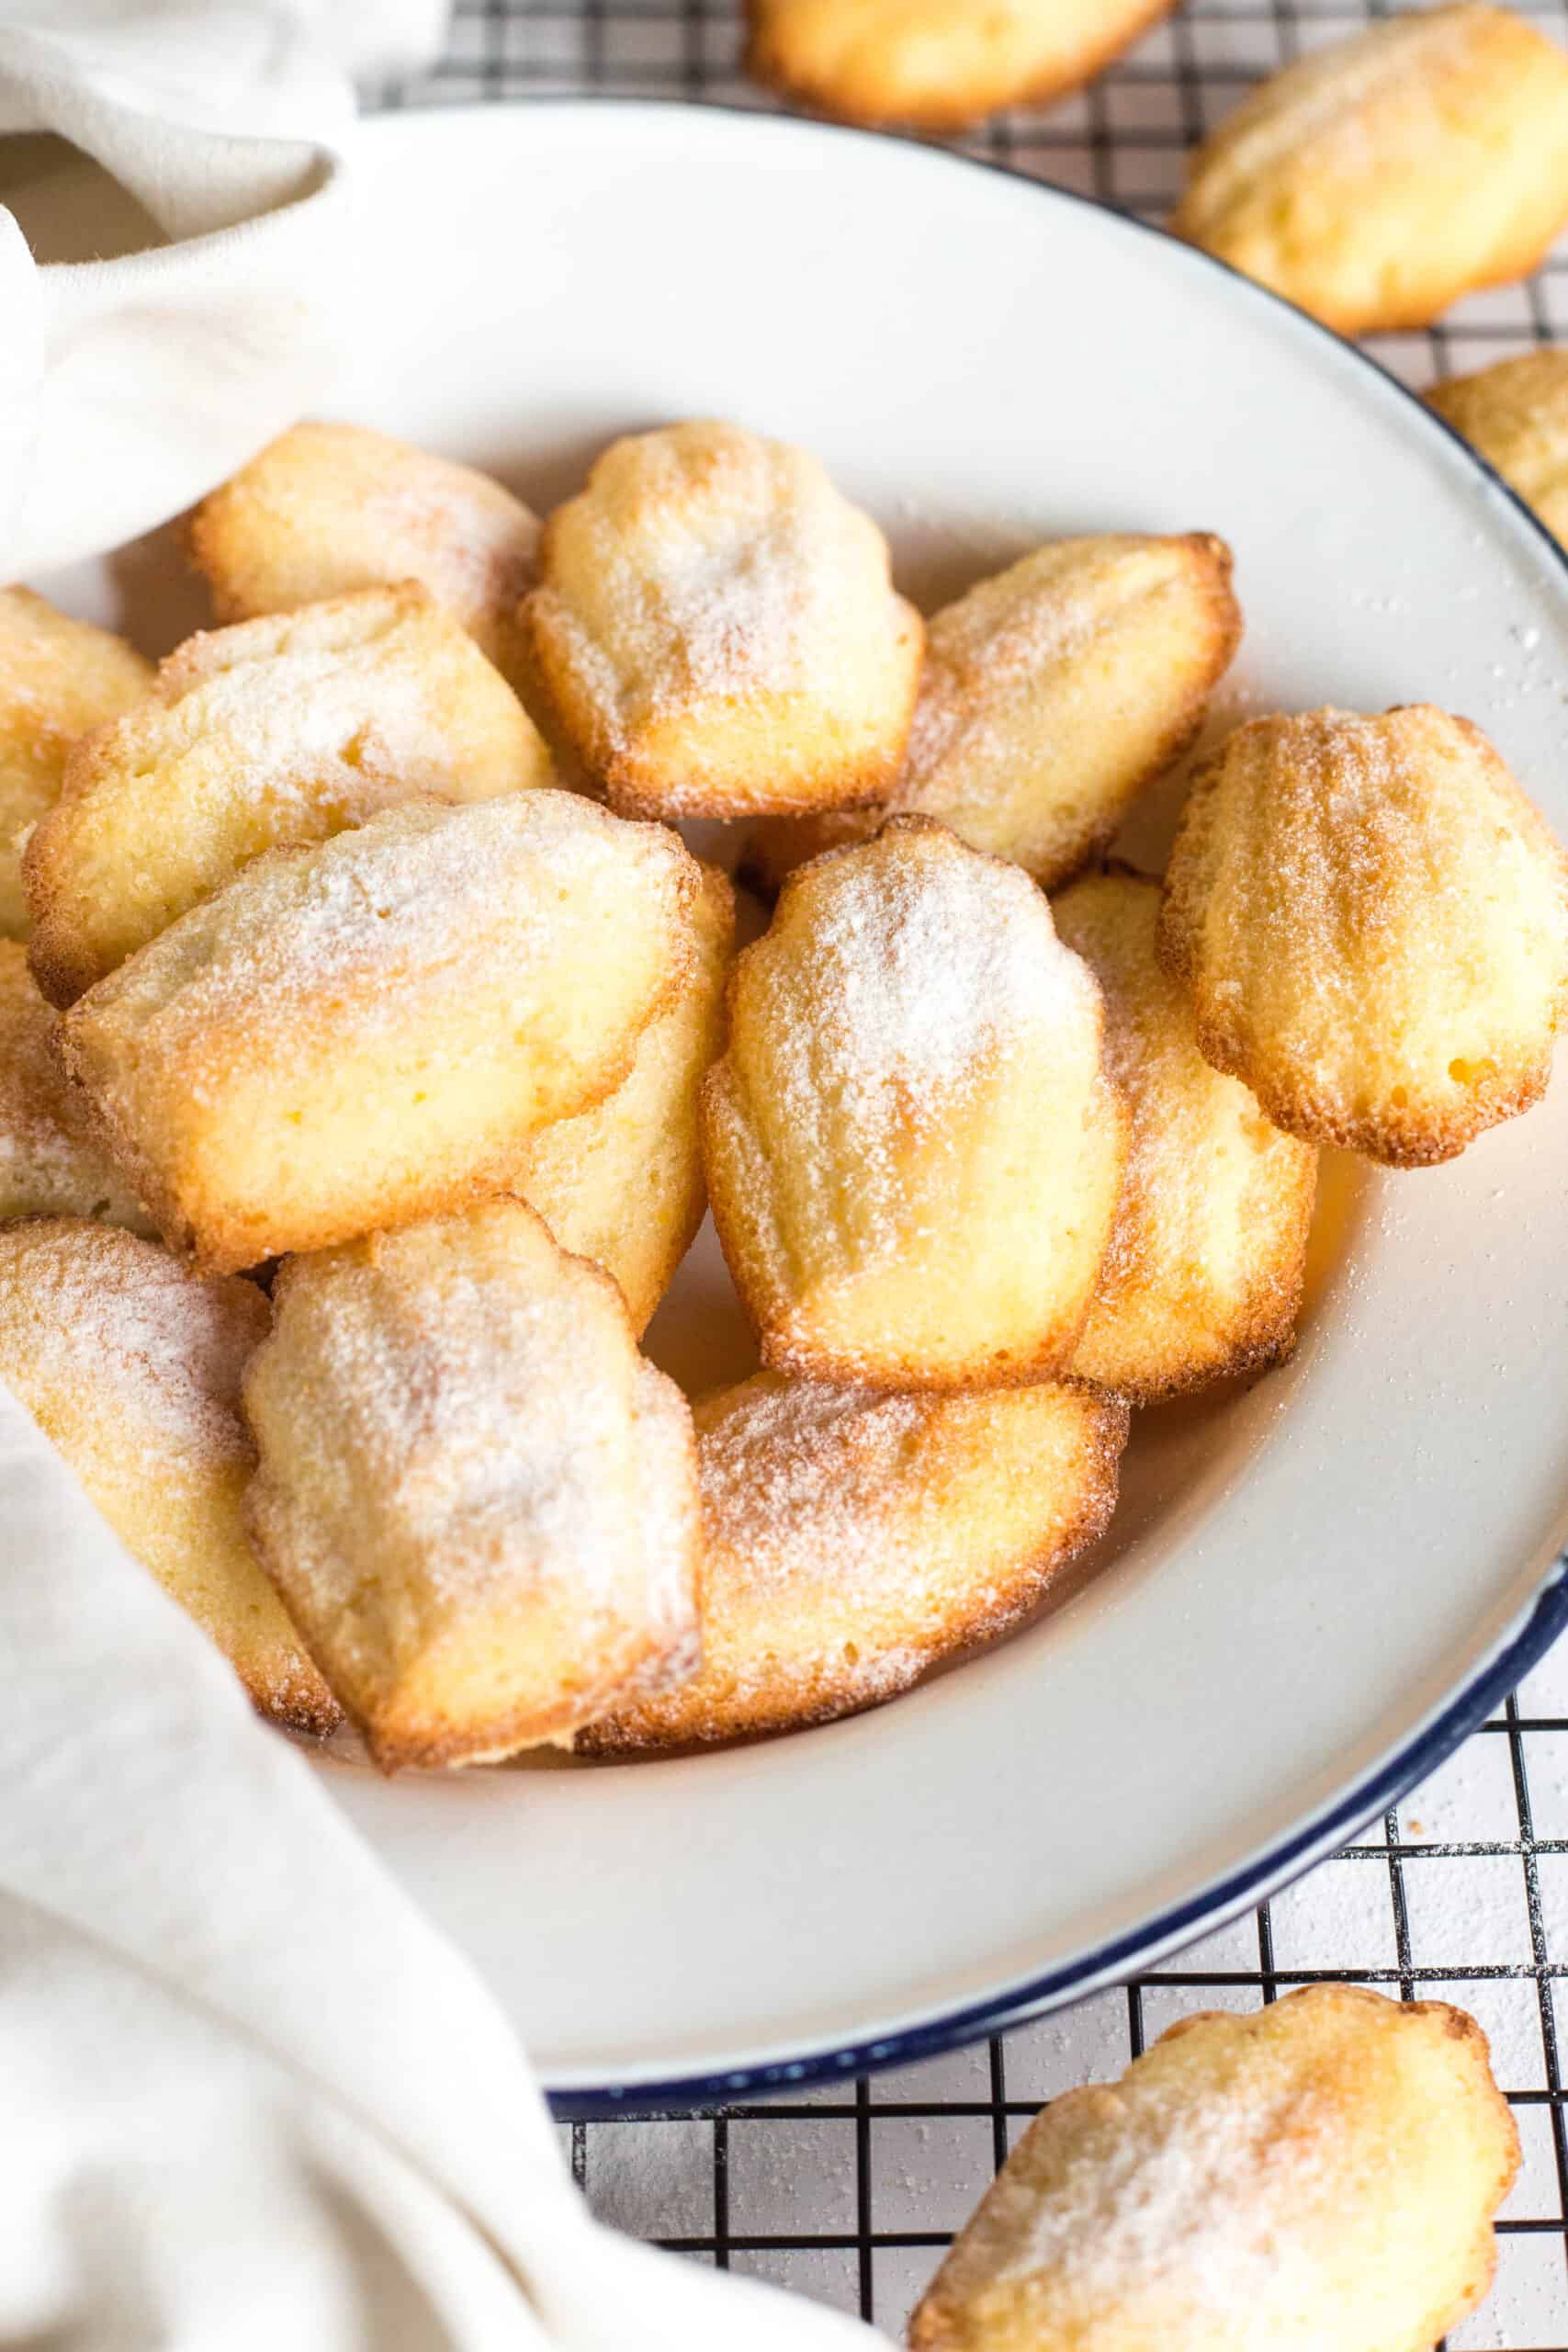 Up close image of gluten-free madeleines on a white plate.